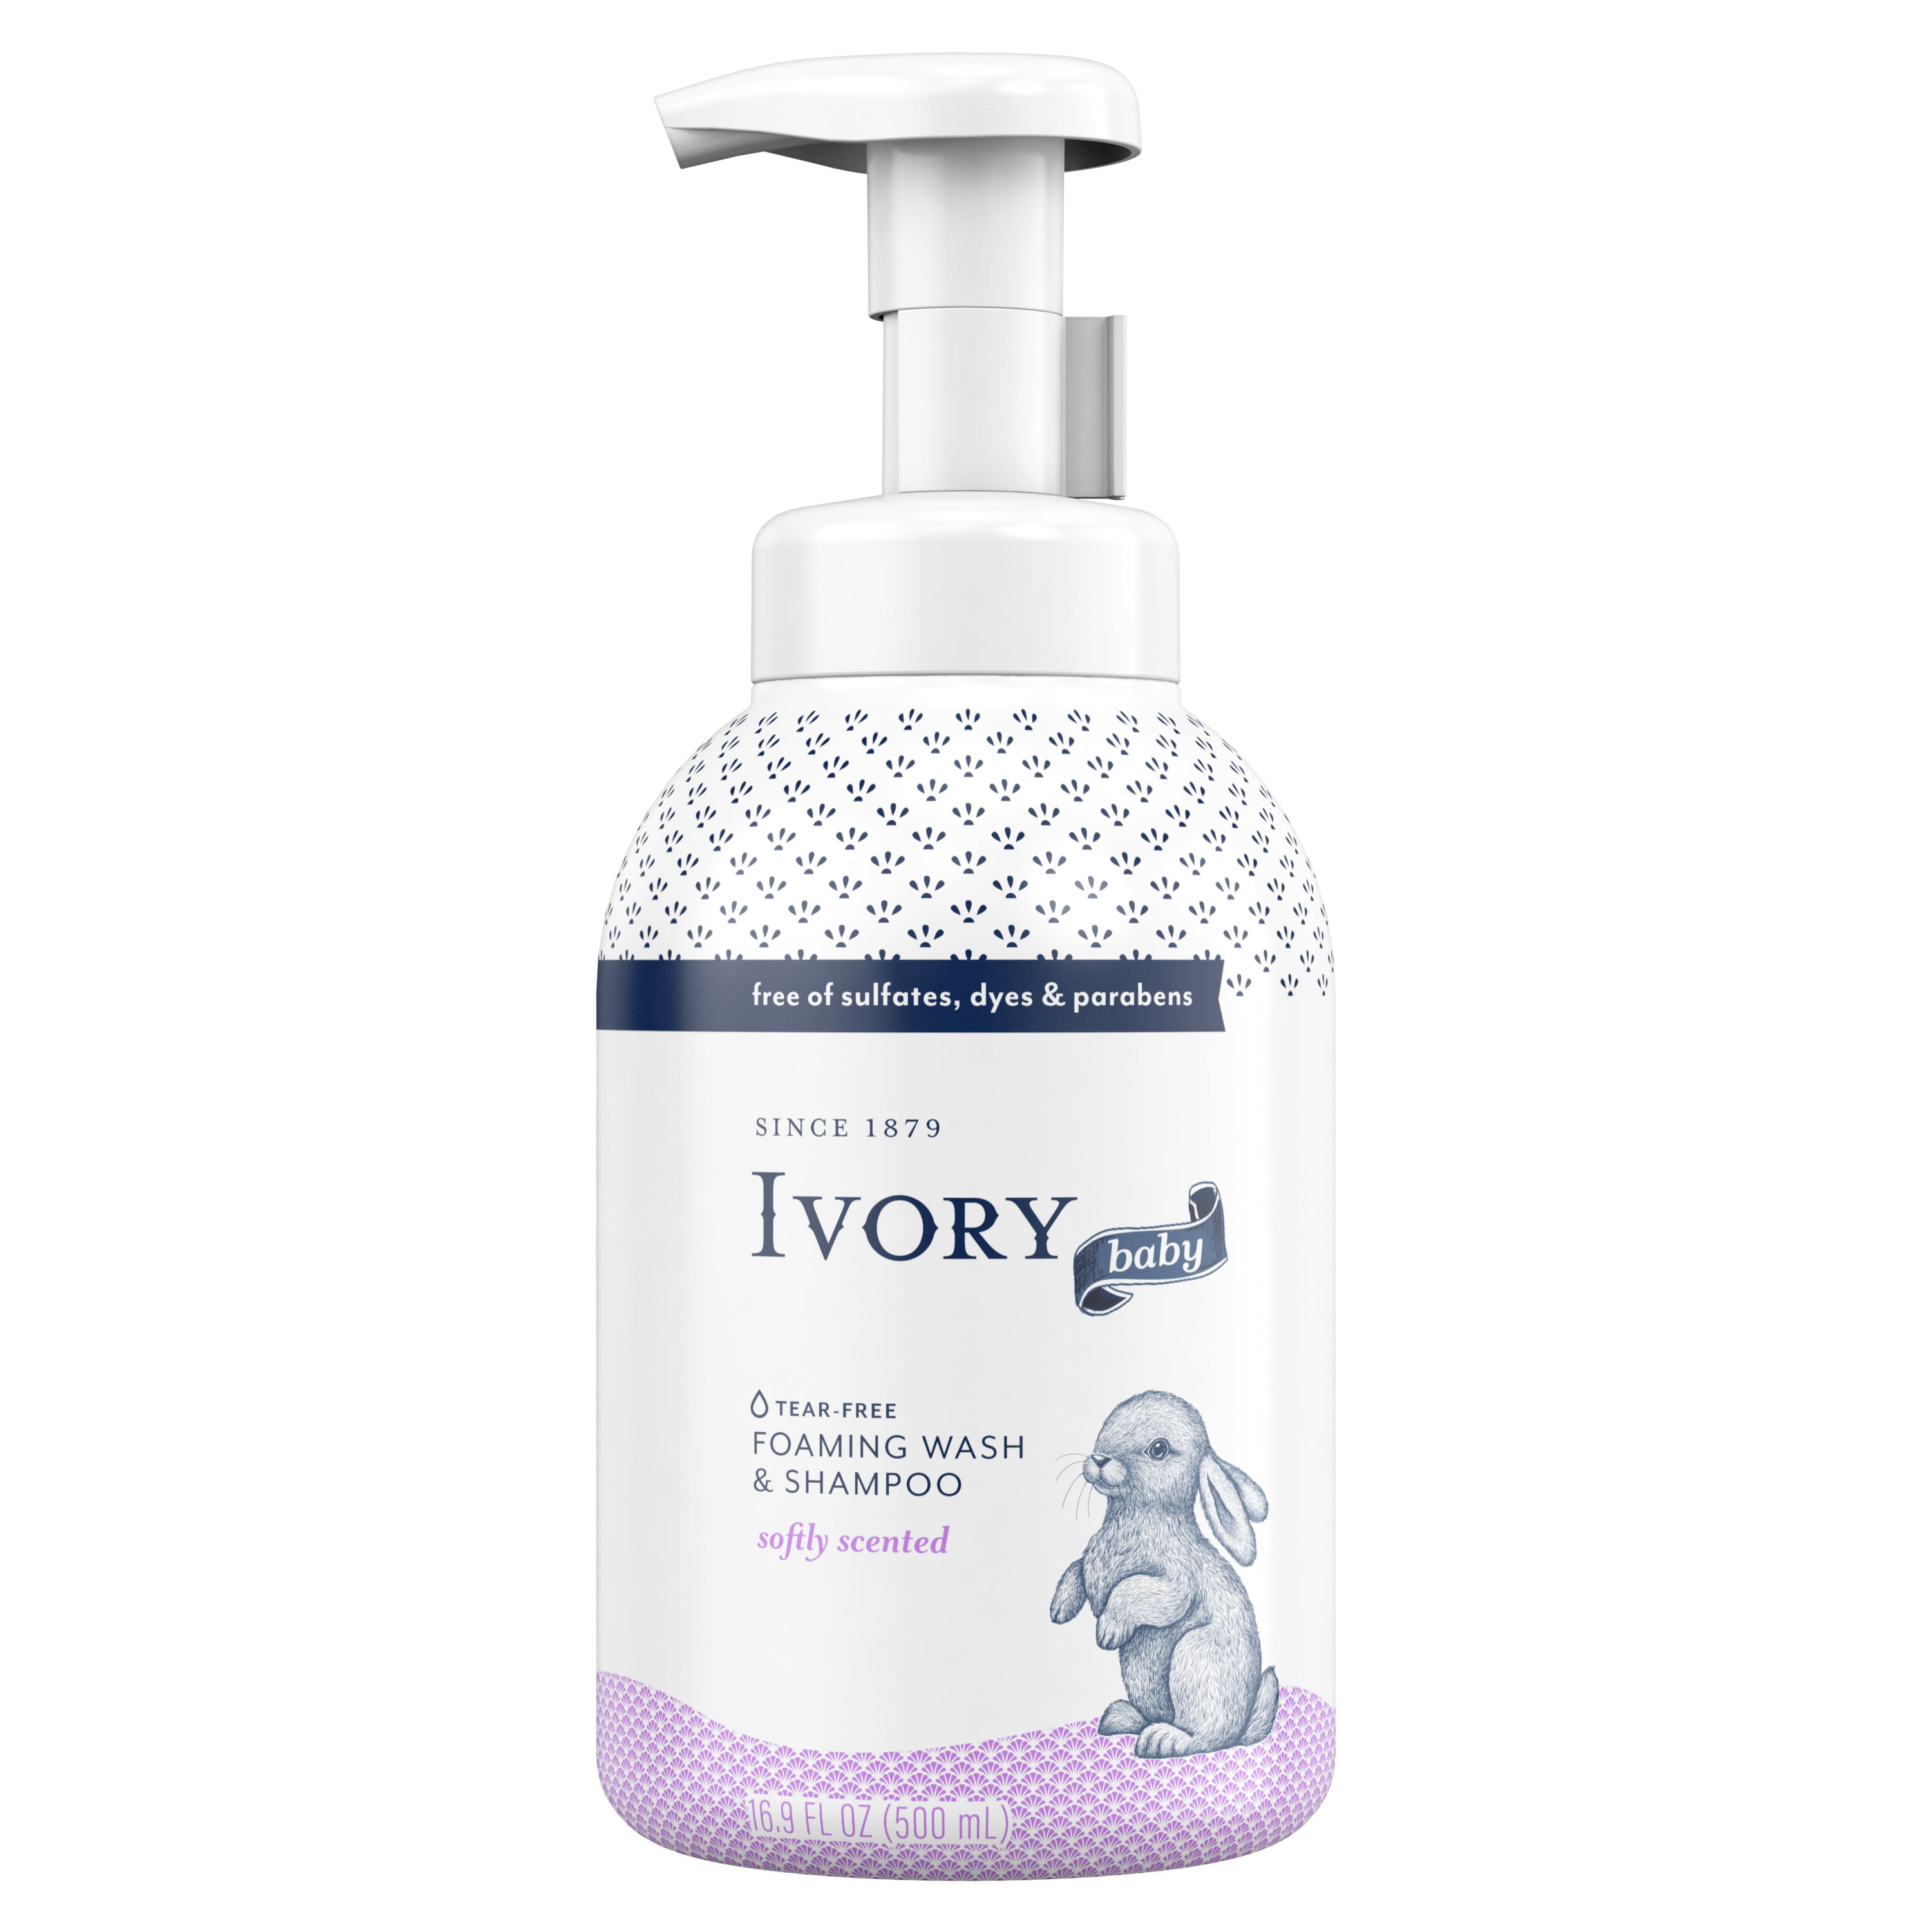 Ivory Baby Foaming Baby Wash & Shampoo, Softly Scented for Sensitive Skin, 16.9 oz